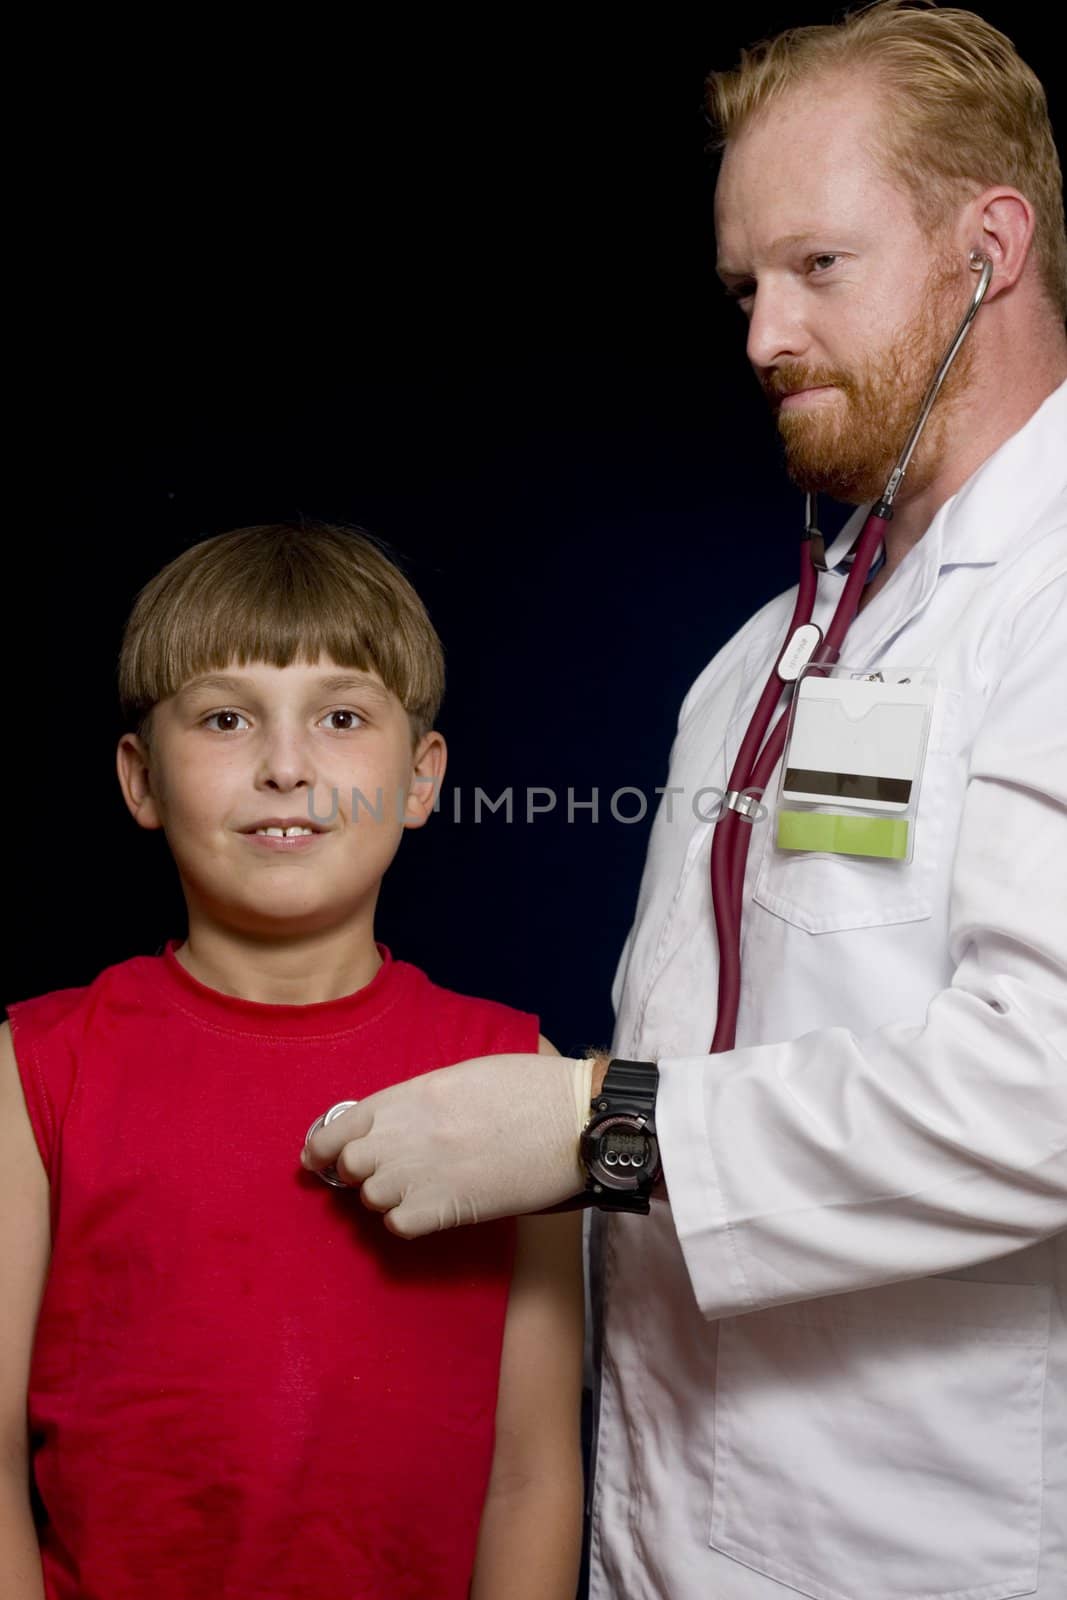 Doctor using a stethoscope with young child patient.